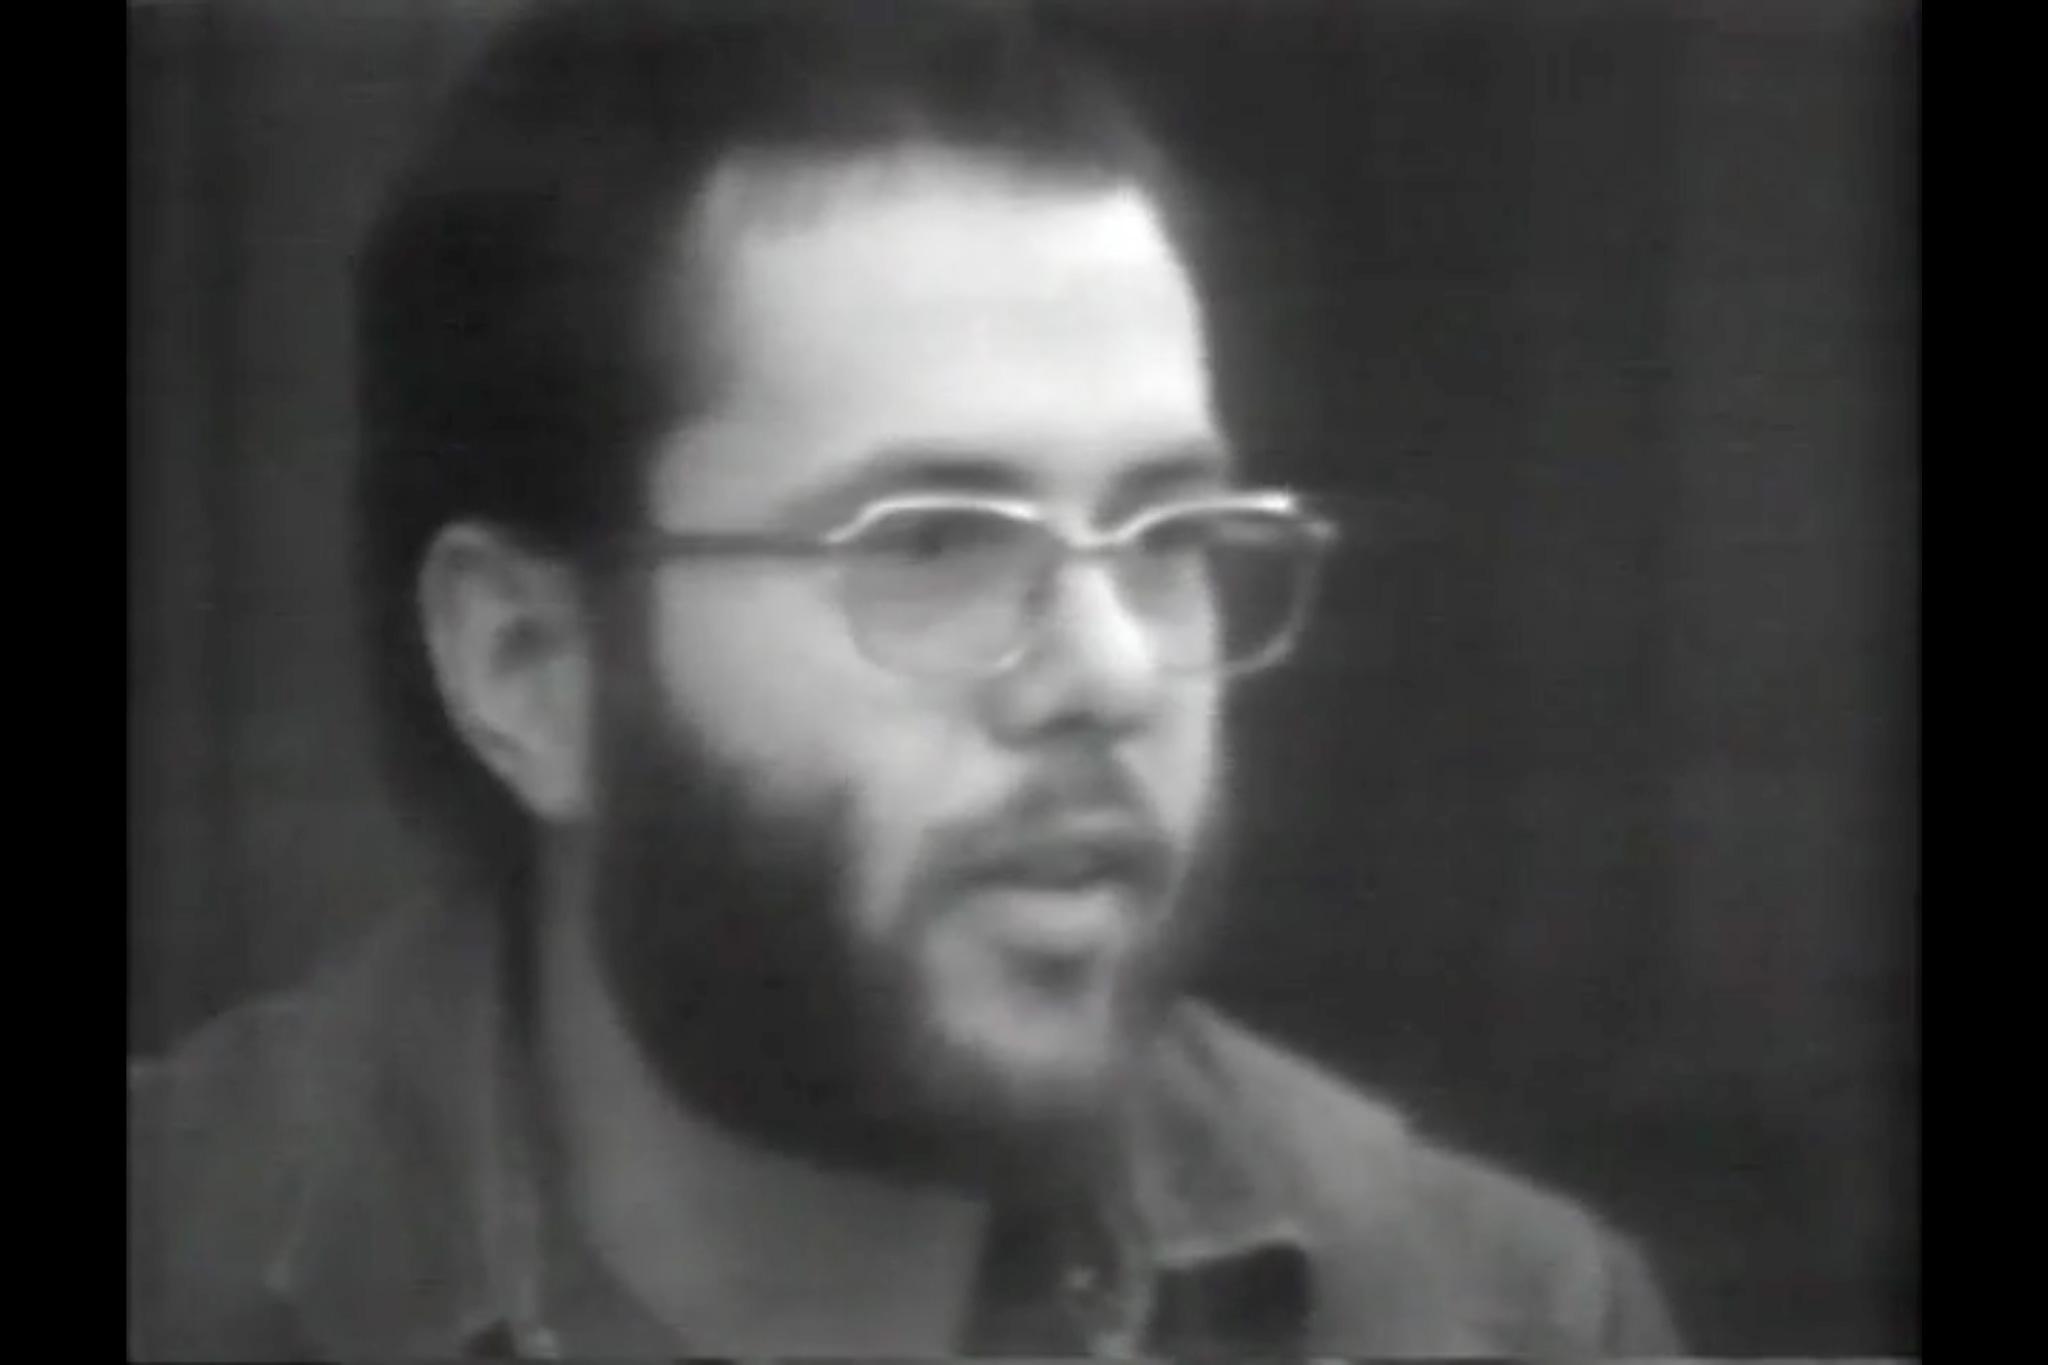 Black and white image of a man with a beard and glasses talking looking to the right.